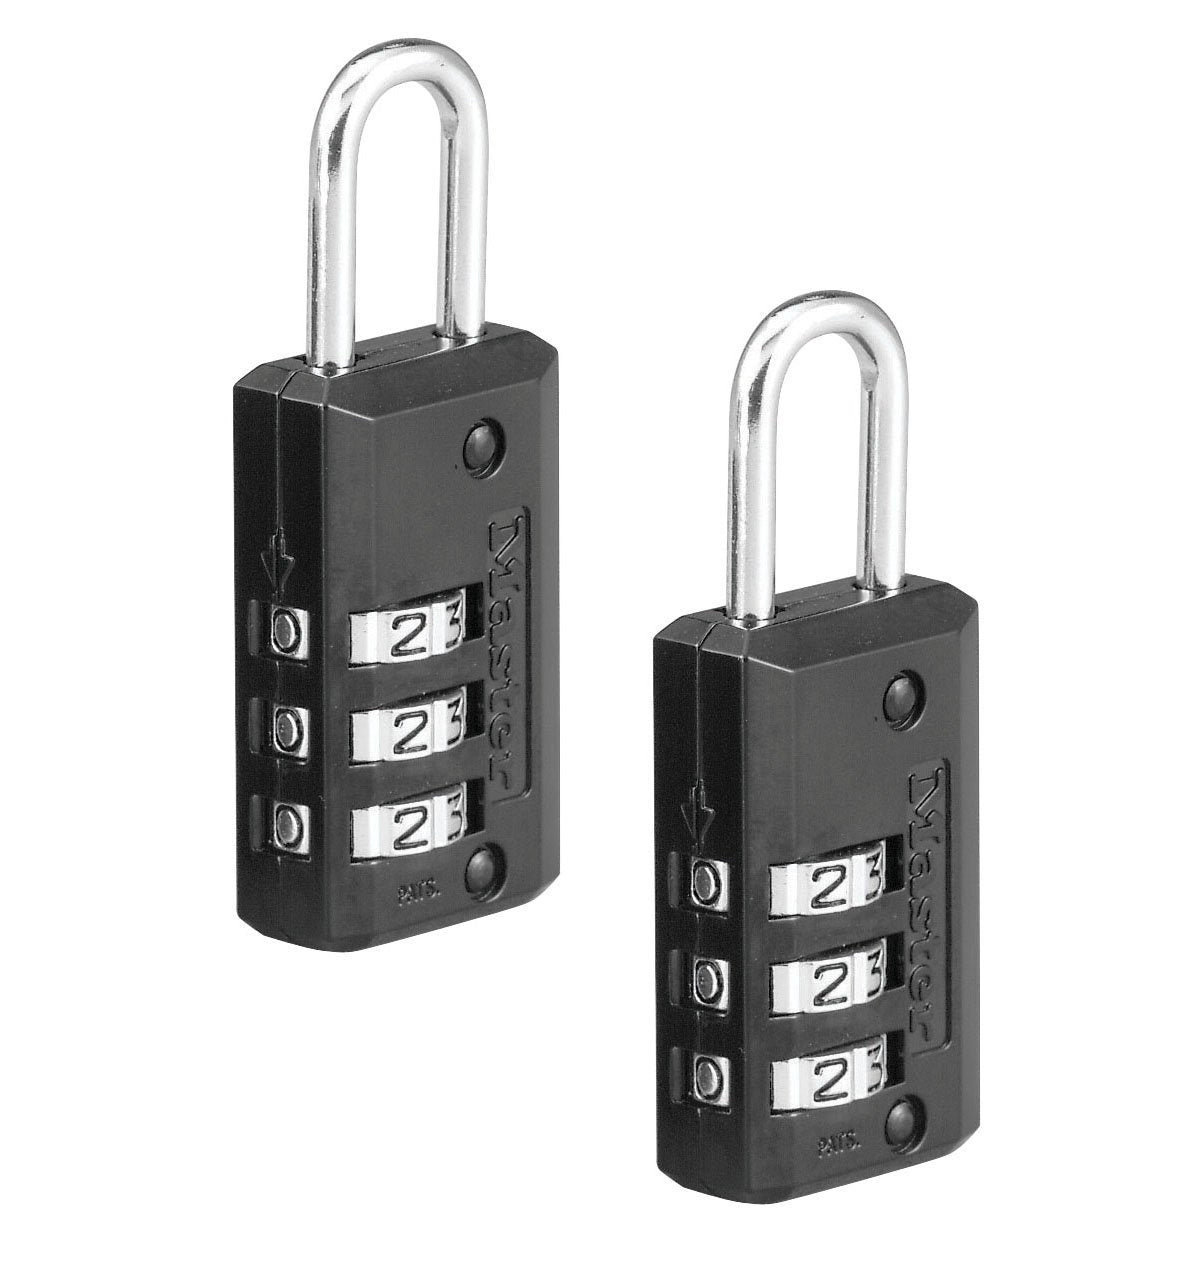 Buy master lock 646t forgot combination - Online store for home security, combination in USA, on sale, low price, discount deals, coupon code